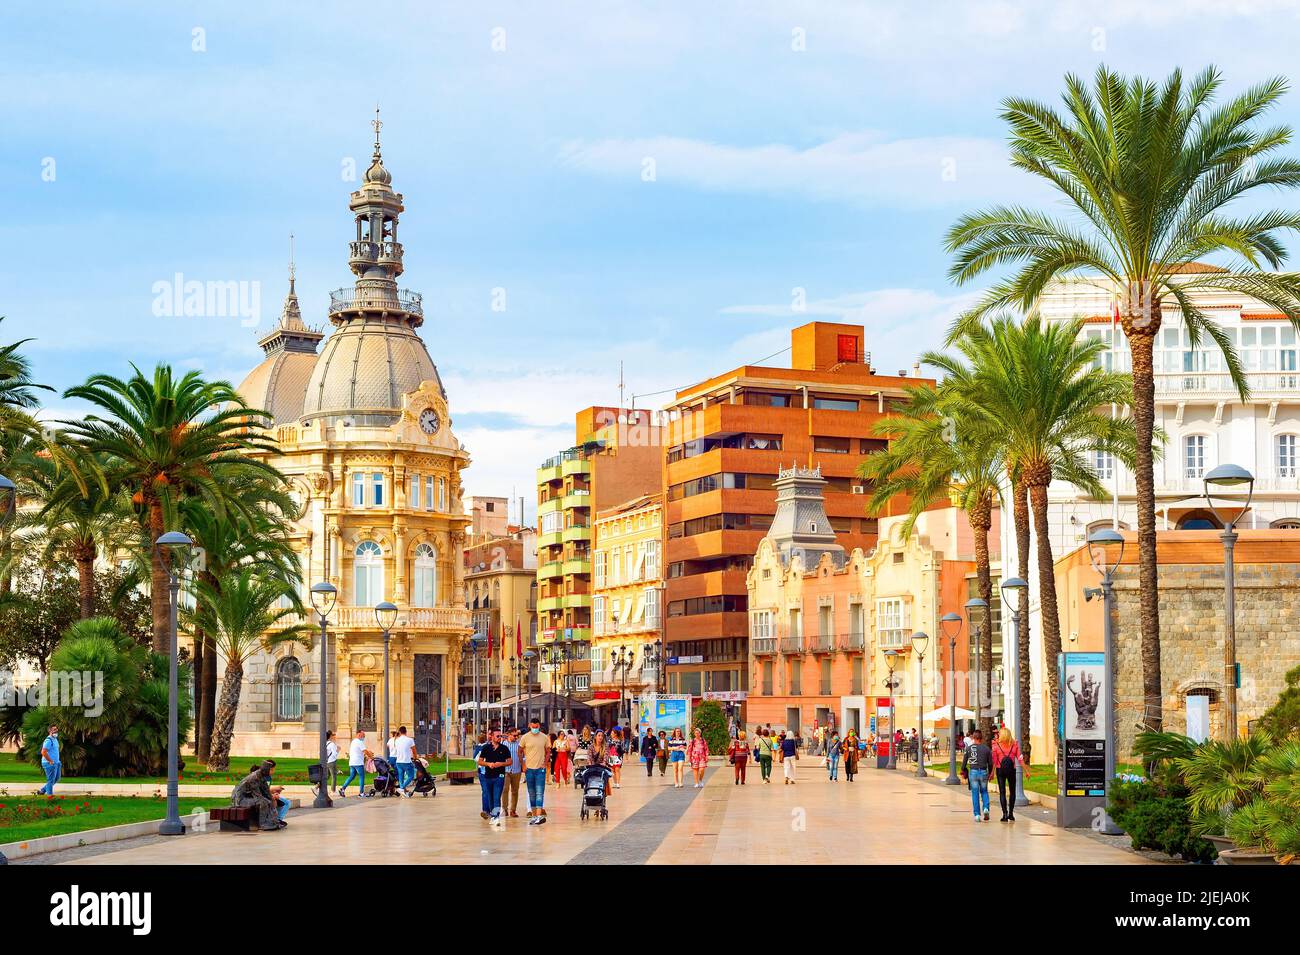 CARTAGENA, SPAIN - NOVEMBER 1, 2021: Tourists walking by city center, colonial architecture, Municipality of Cartagena Stock Photo